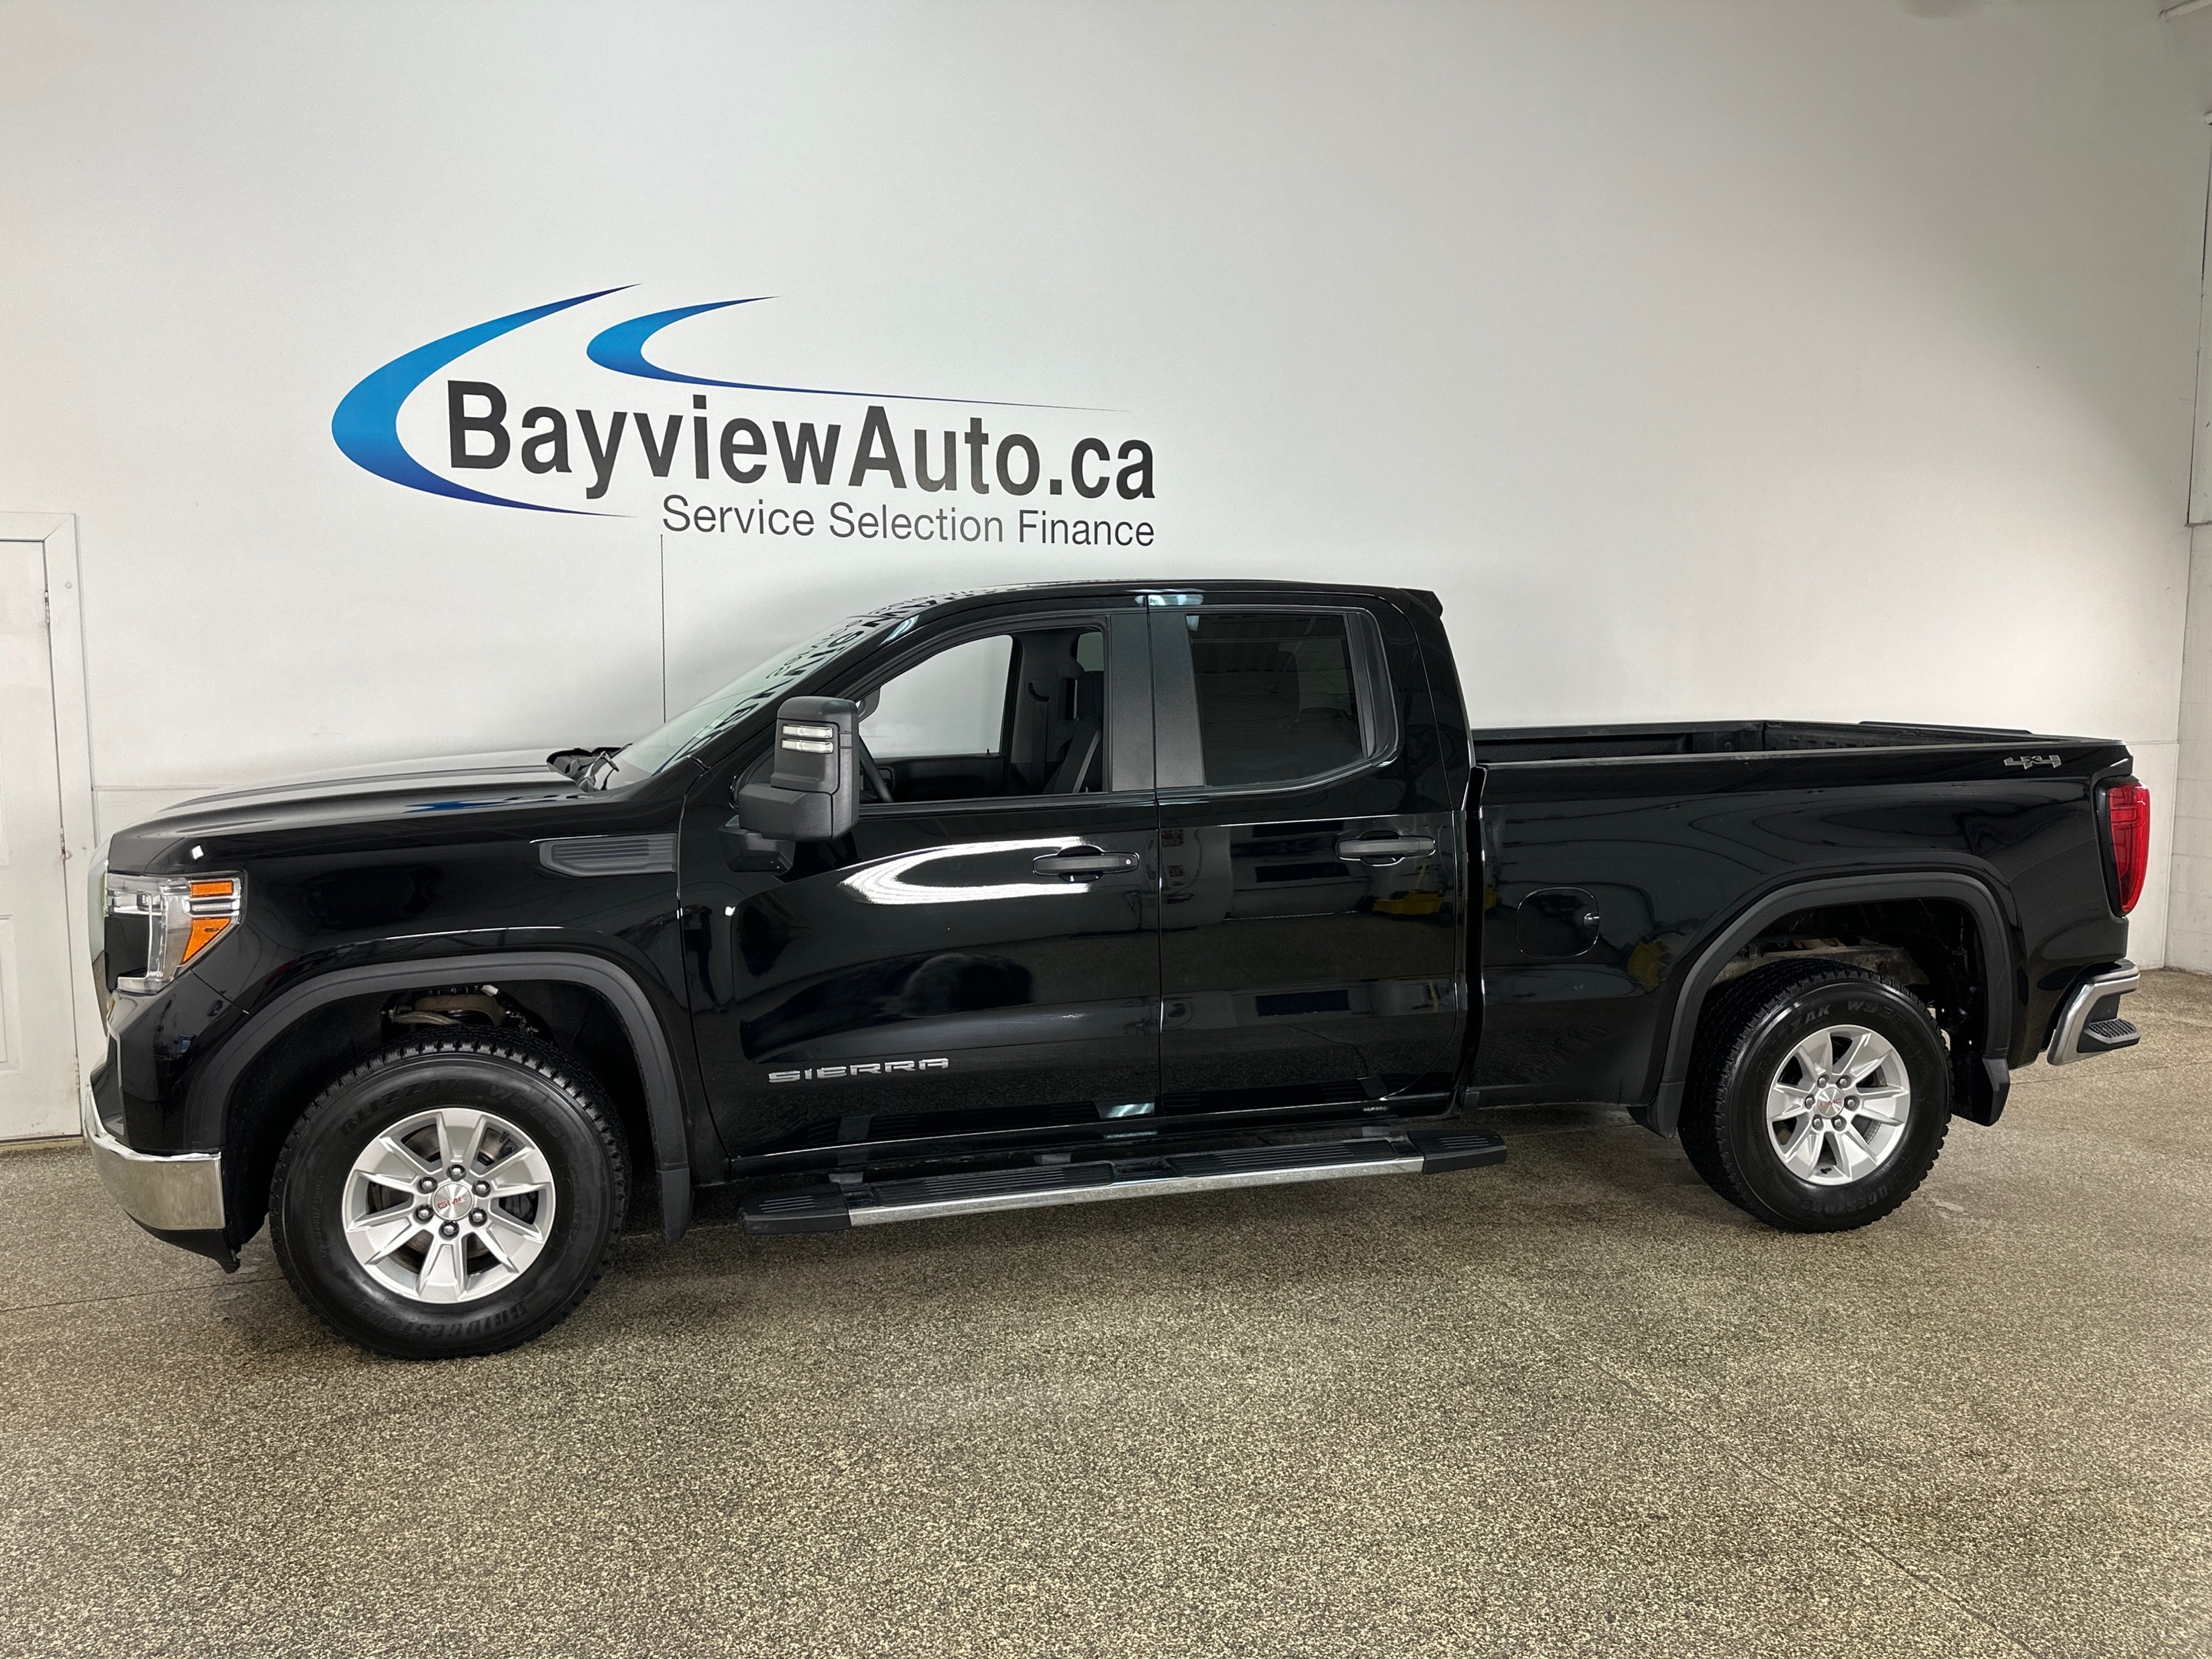 2022 GMC Sierra 1500 Limited PRO DOUBLE CAB 4WD BLACK! PWR HEATED SEATS & MORE!